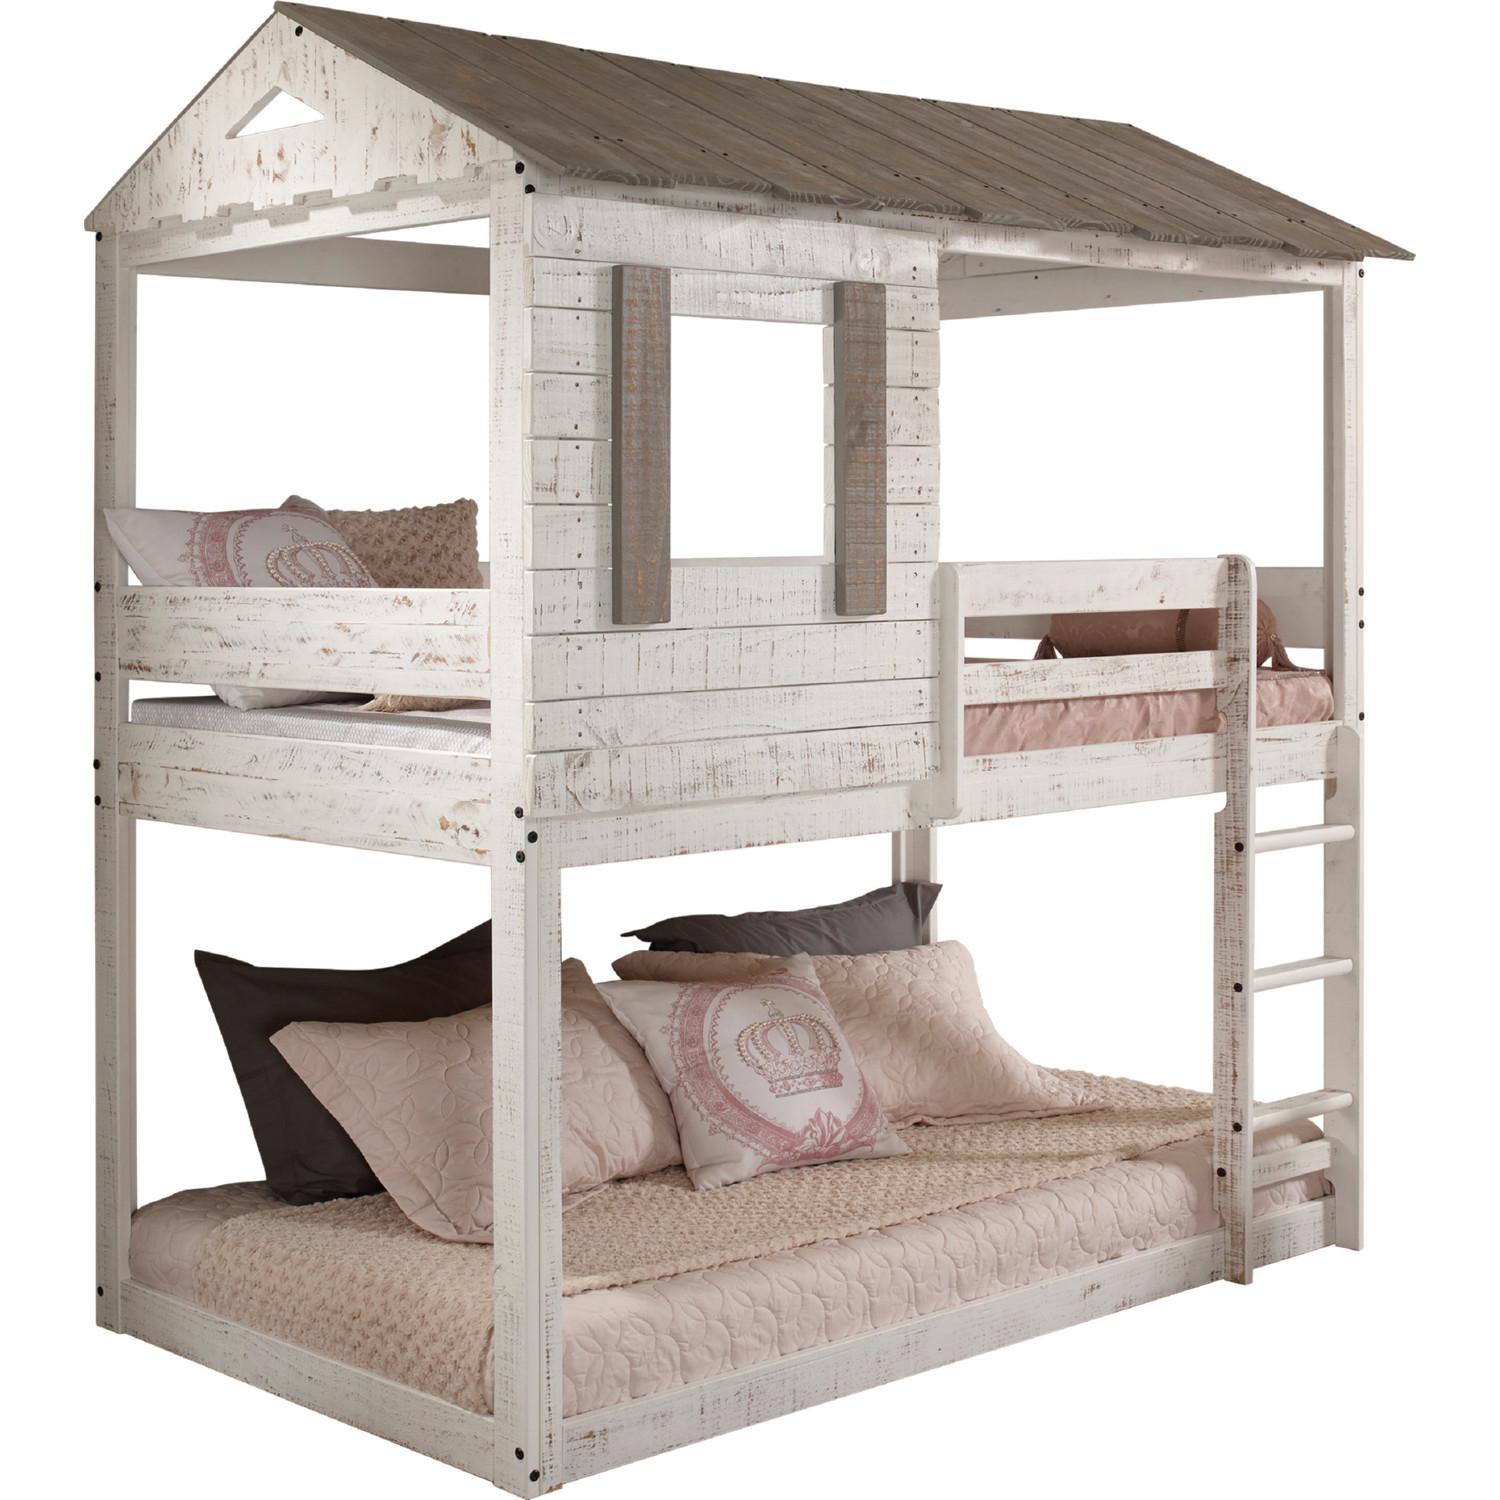 Transitional, Cottage Twin/Twin Bunk Bed Darlene 38135 in White 